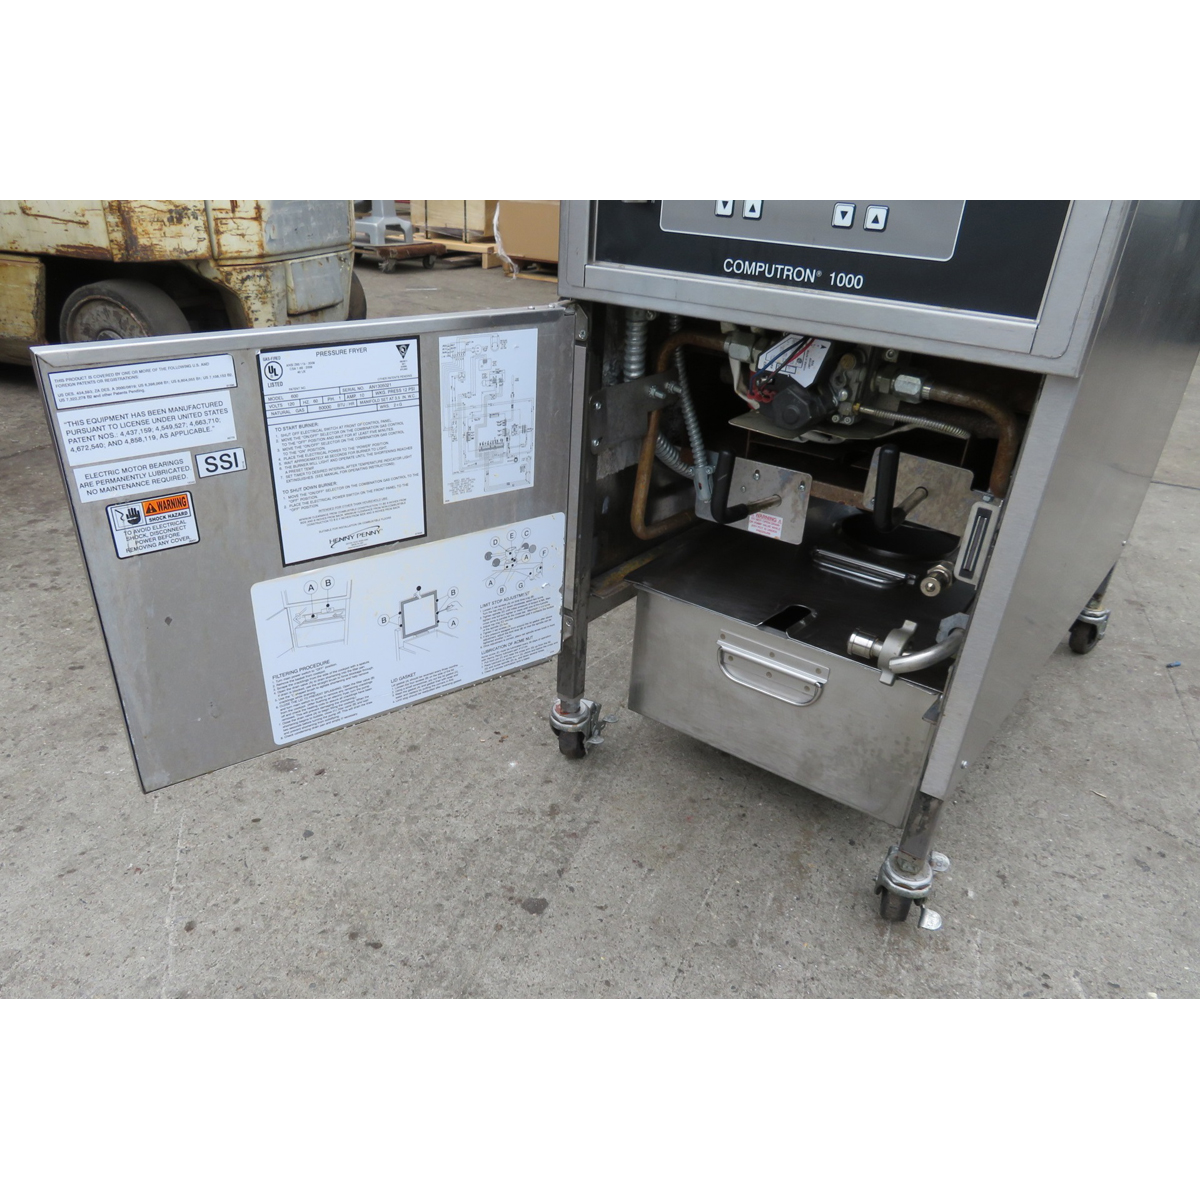 Henny Penny 600 Computron 1000 Natural Gas Pressure Fryer 120V Pressure Fryer, Used Great Condition image 4